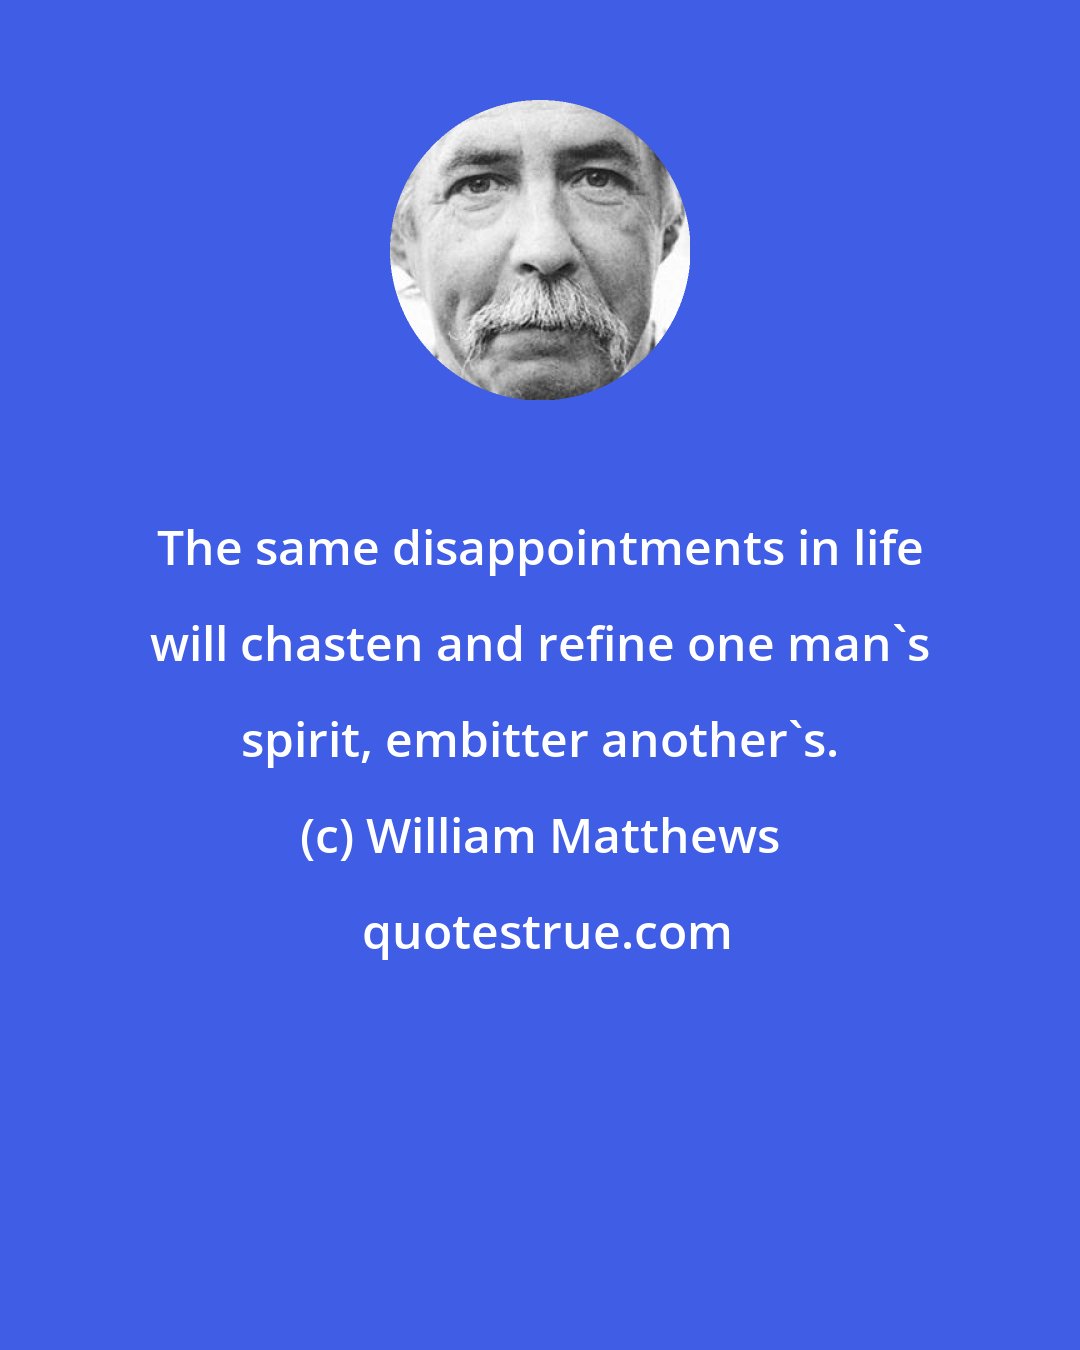 William Matthews: The same disappointments in life will chasten and refine one man's spirit, embitter another's.